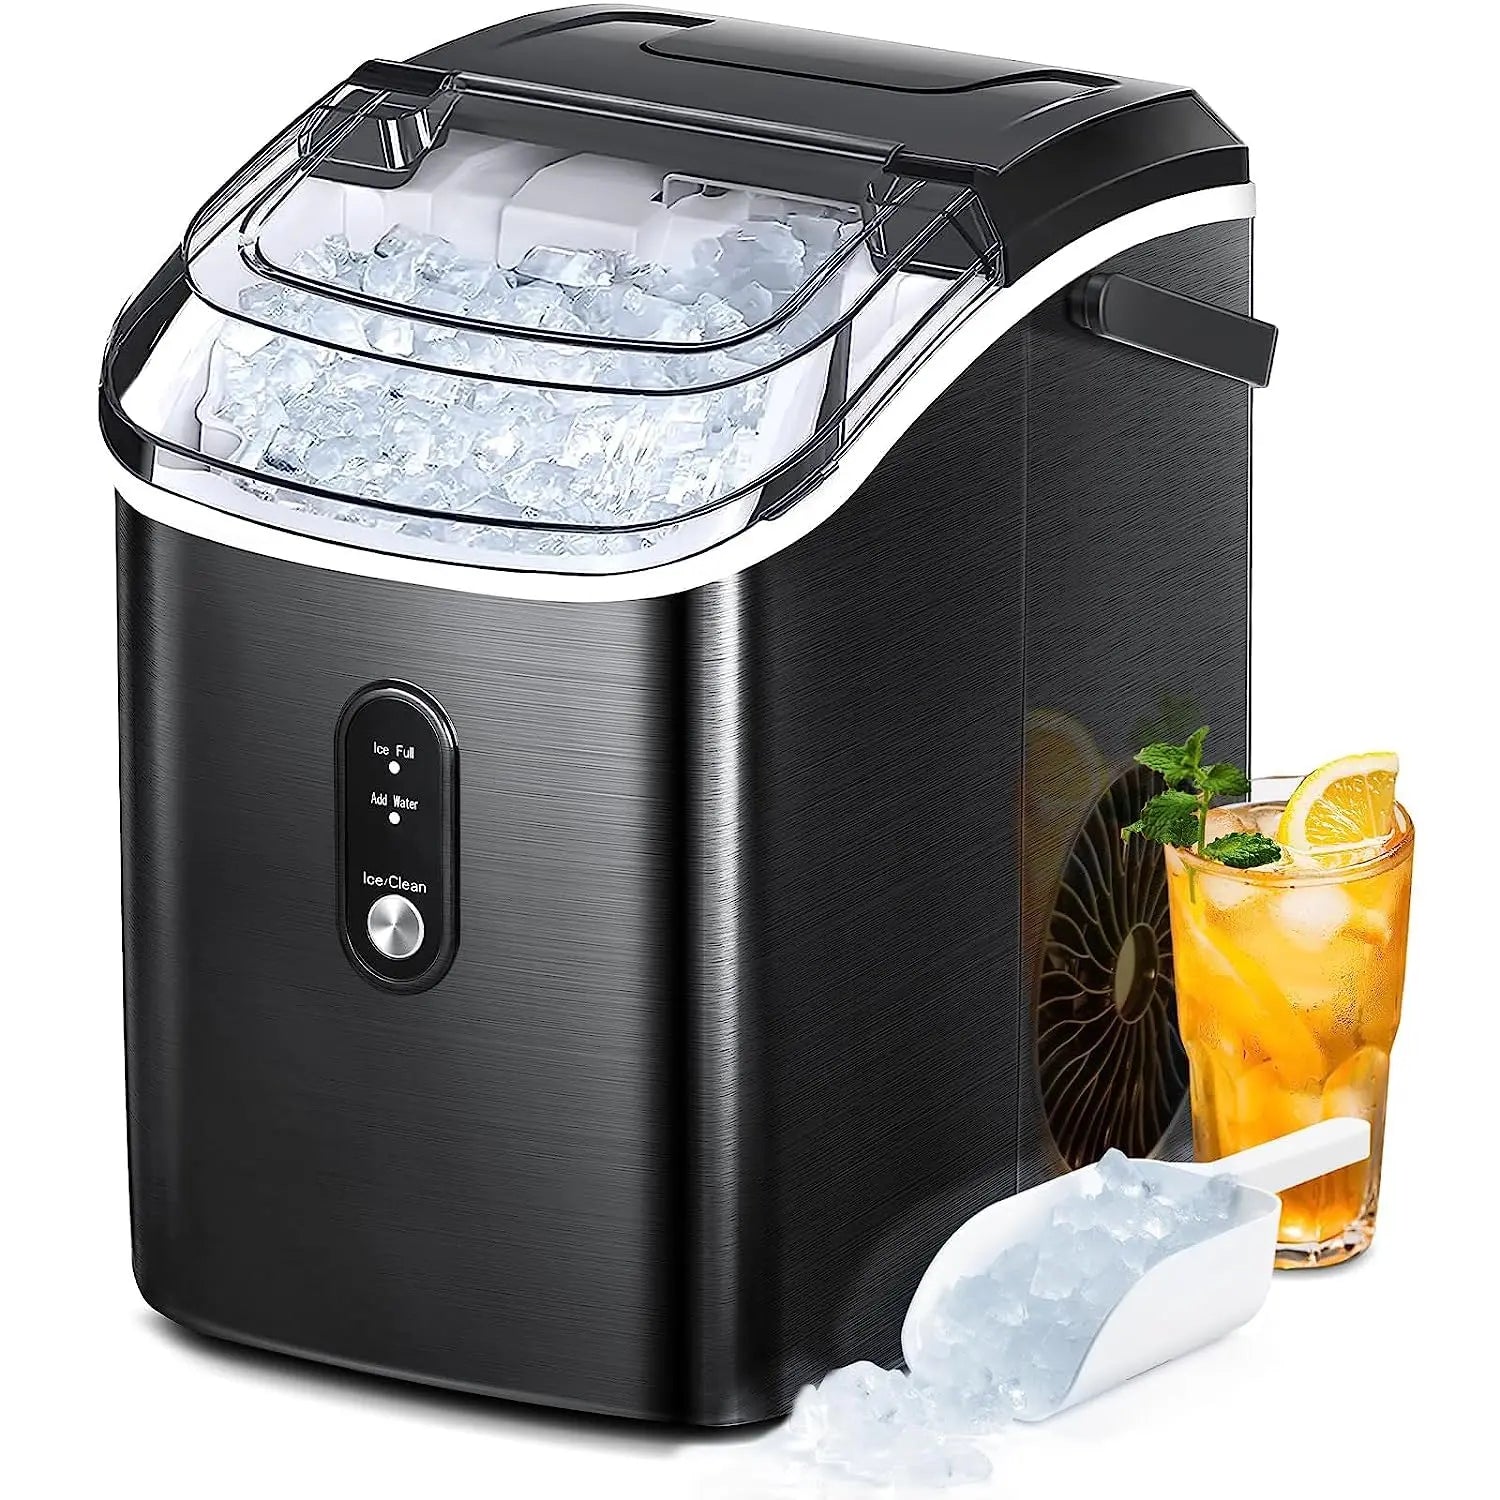 33 lbs Stainless Steel Crunchy Chewable Nugget Ice Maker by